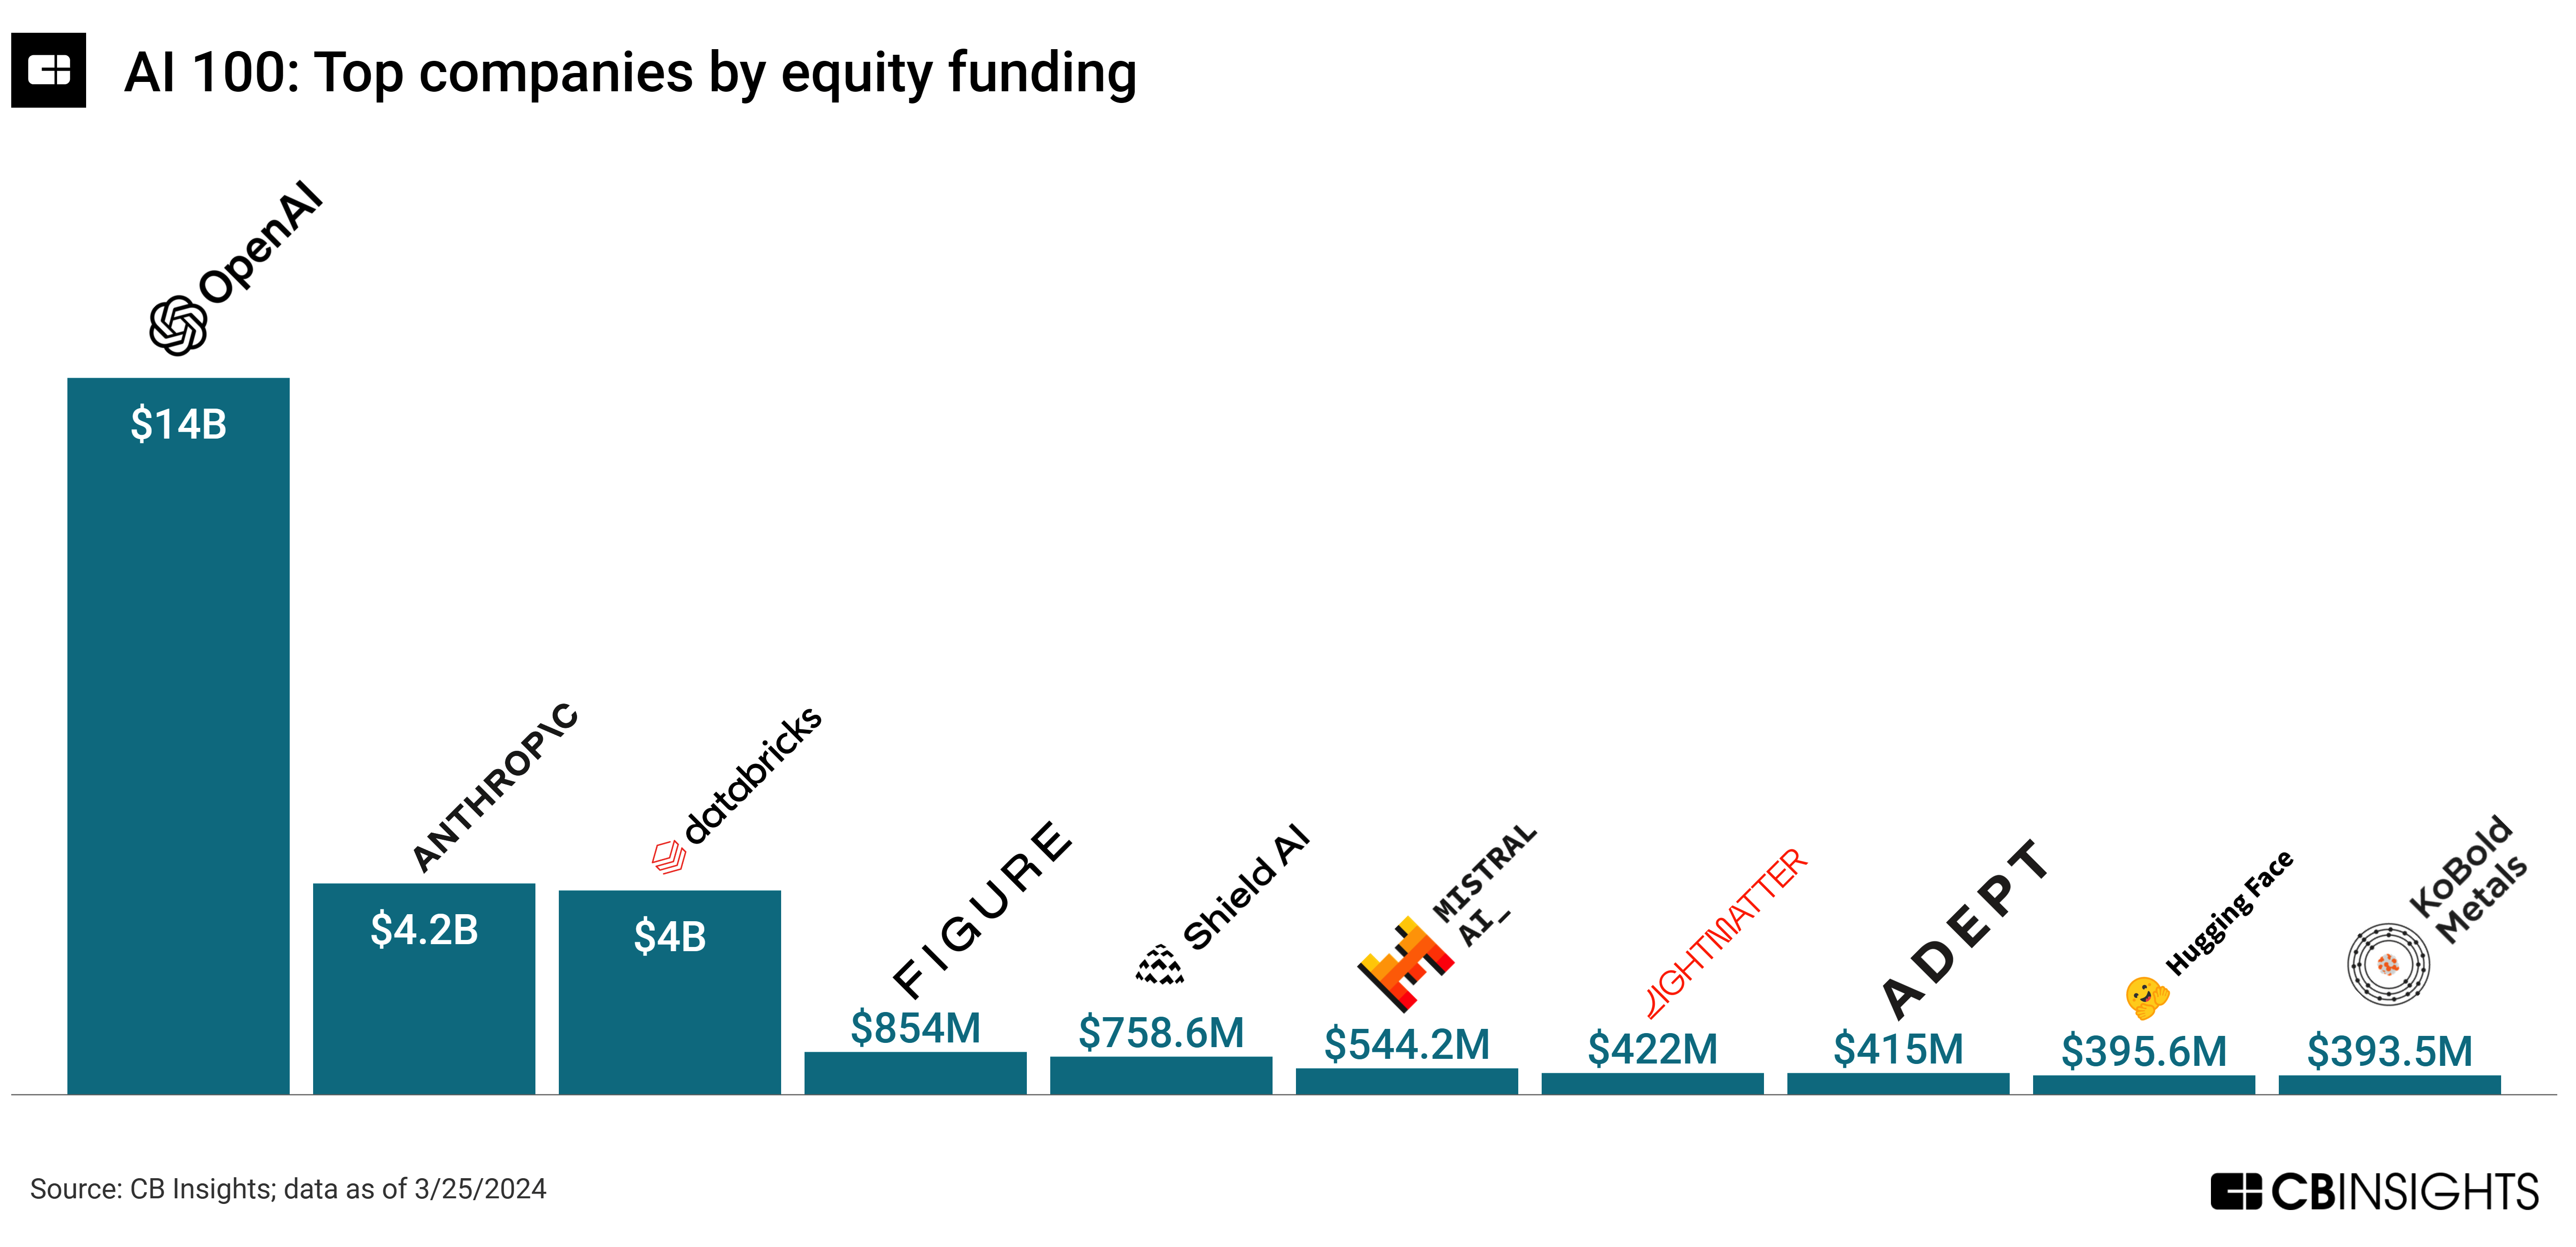 2024 AI 100: Top companies by equity funding, Source: 2024 AI 100, CB Insights, Apr 2024 - Top AI Companies in Asia